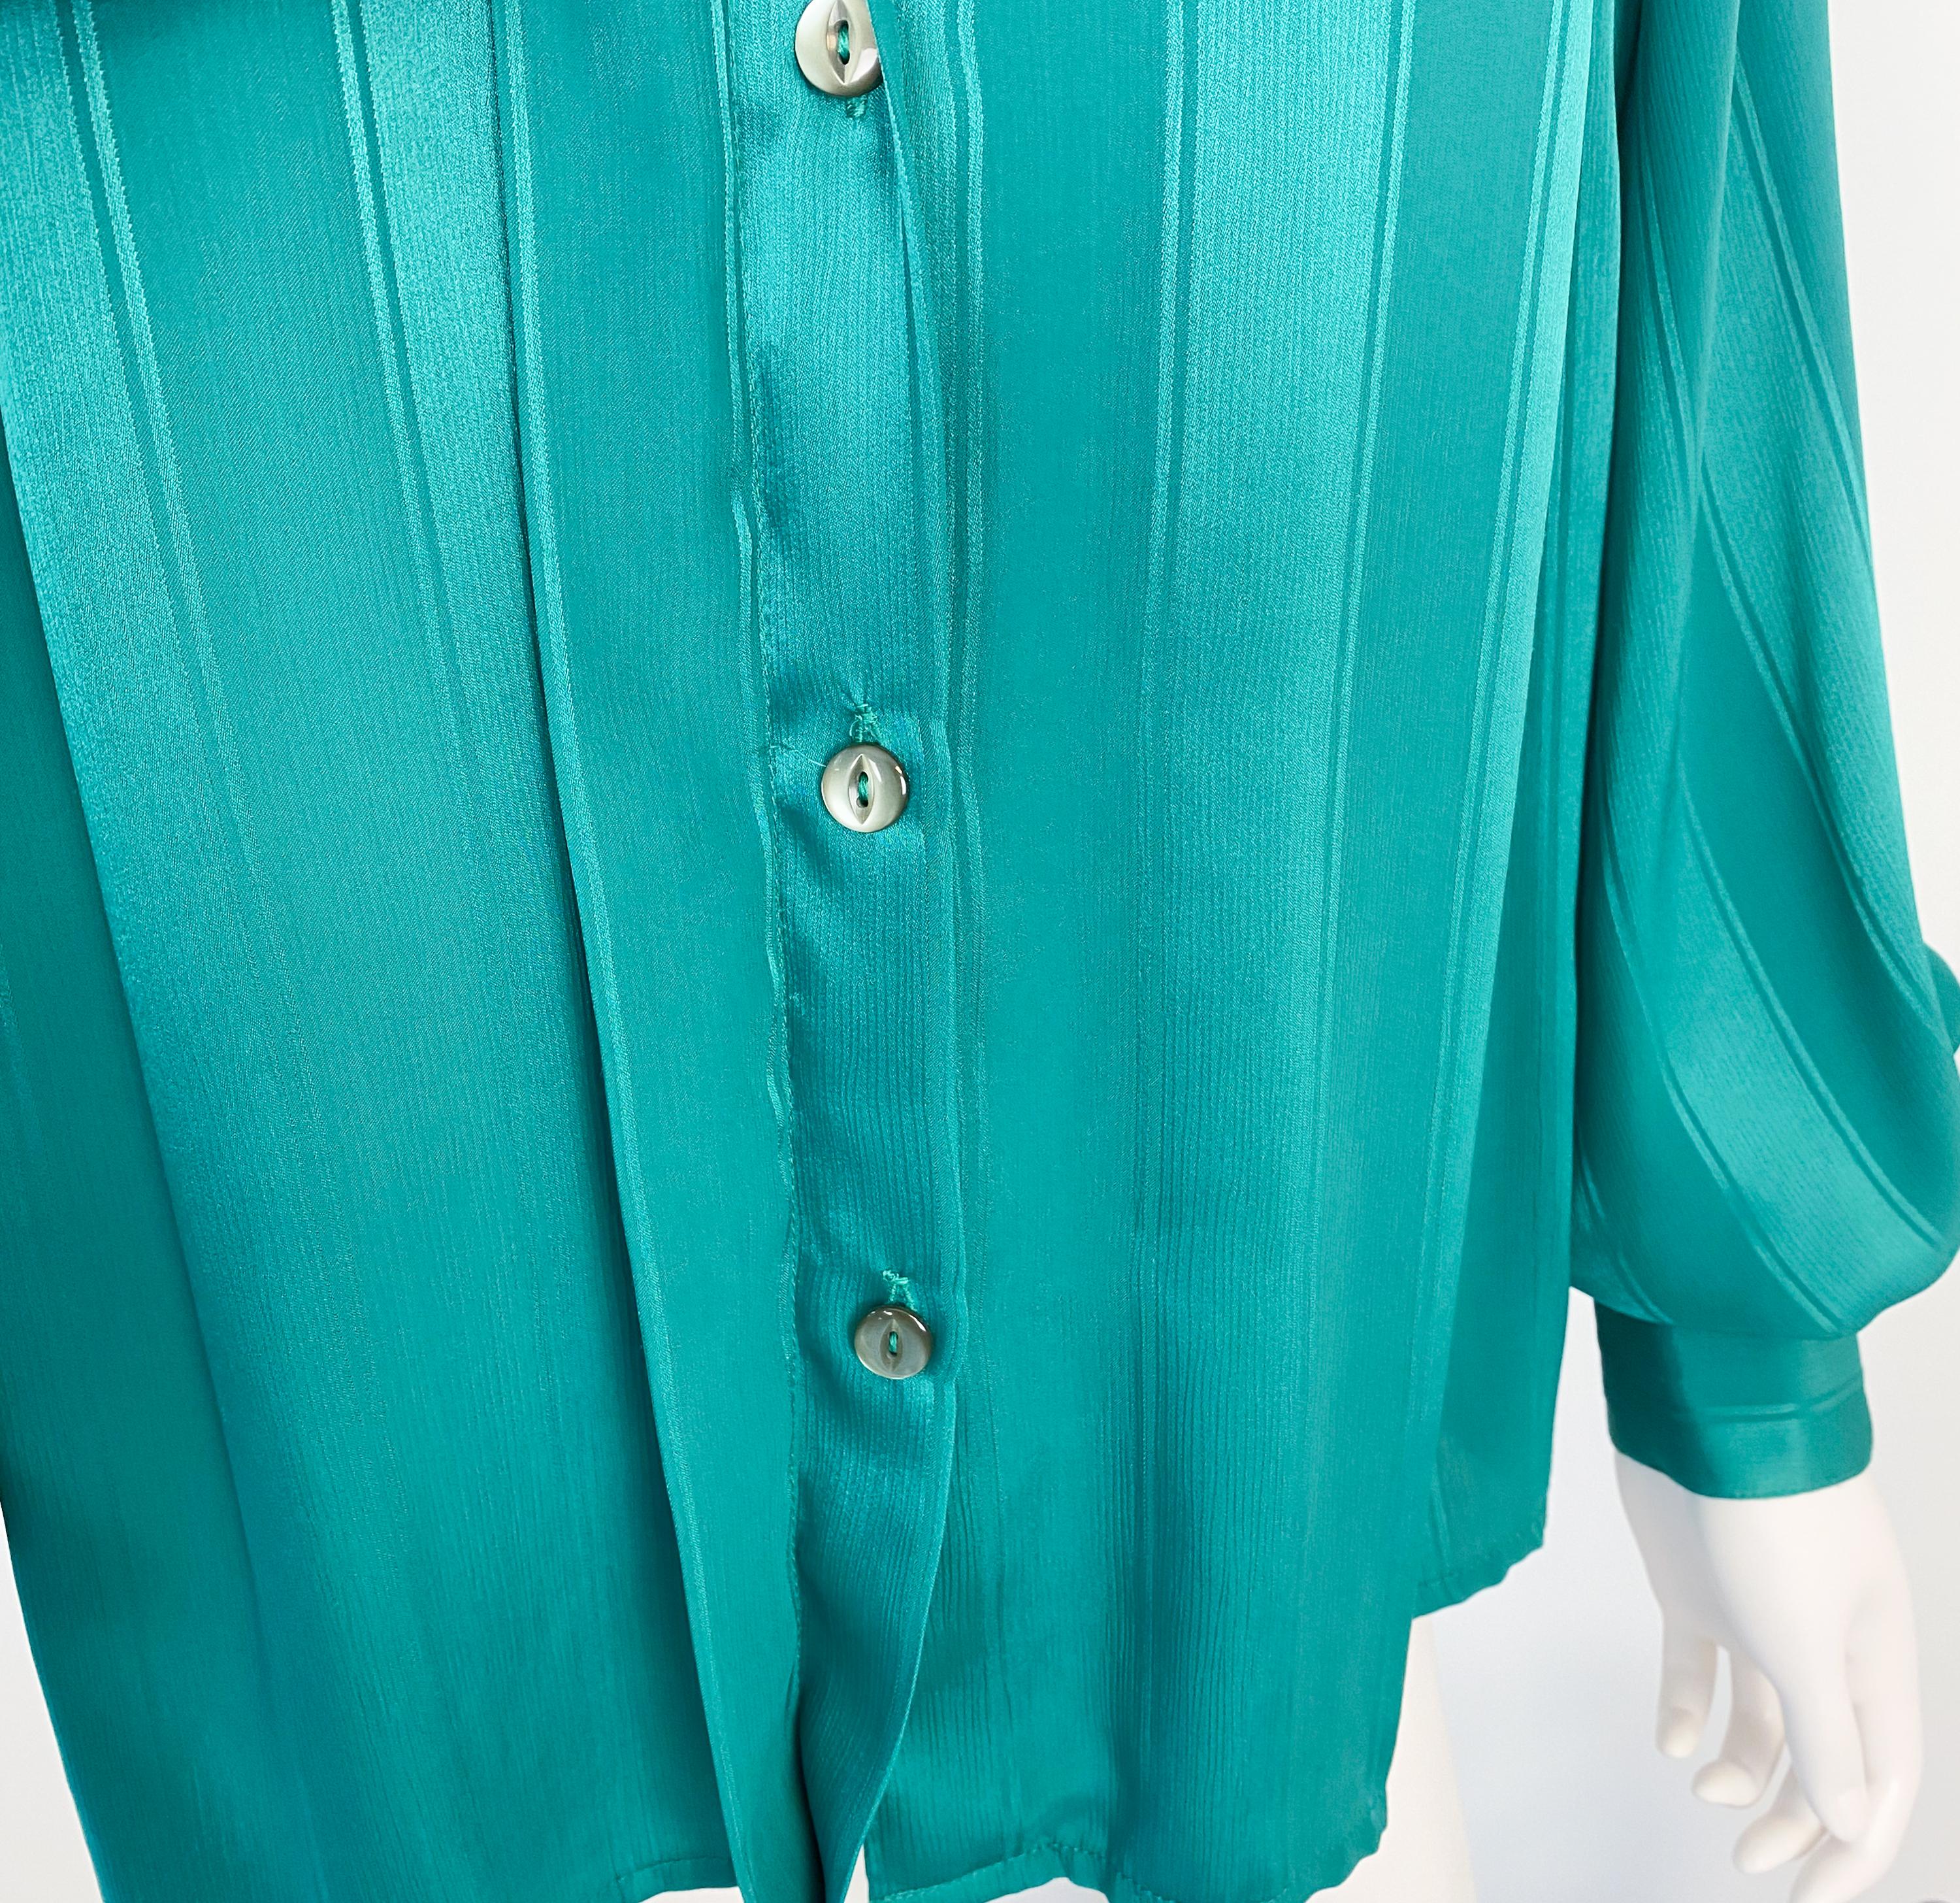 Vintage 1980s Silky Polyester Bow Blouse Top Emerald Green Stripes Size 12/14 For Sale 4